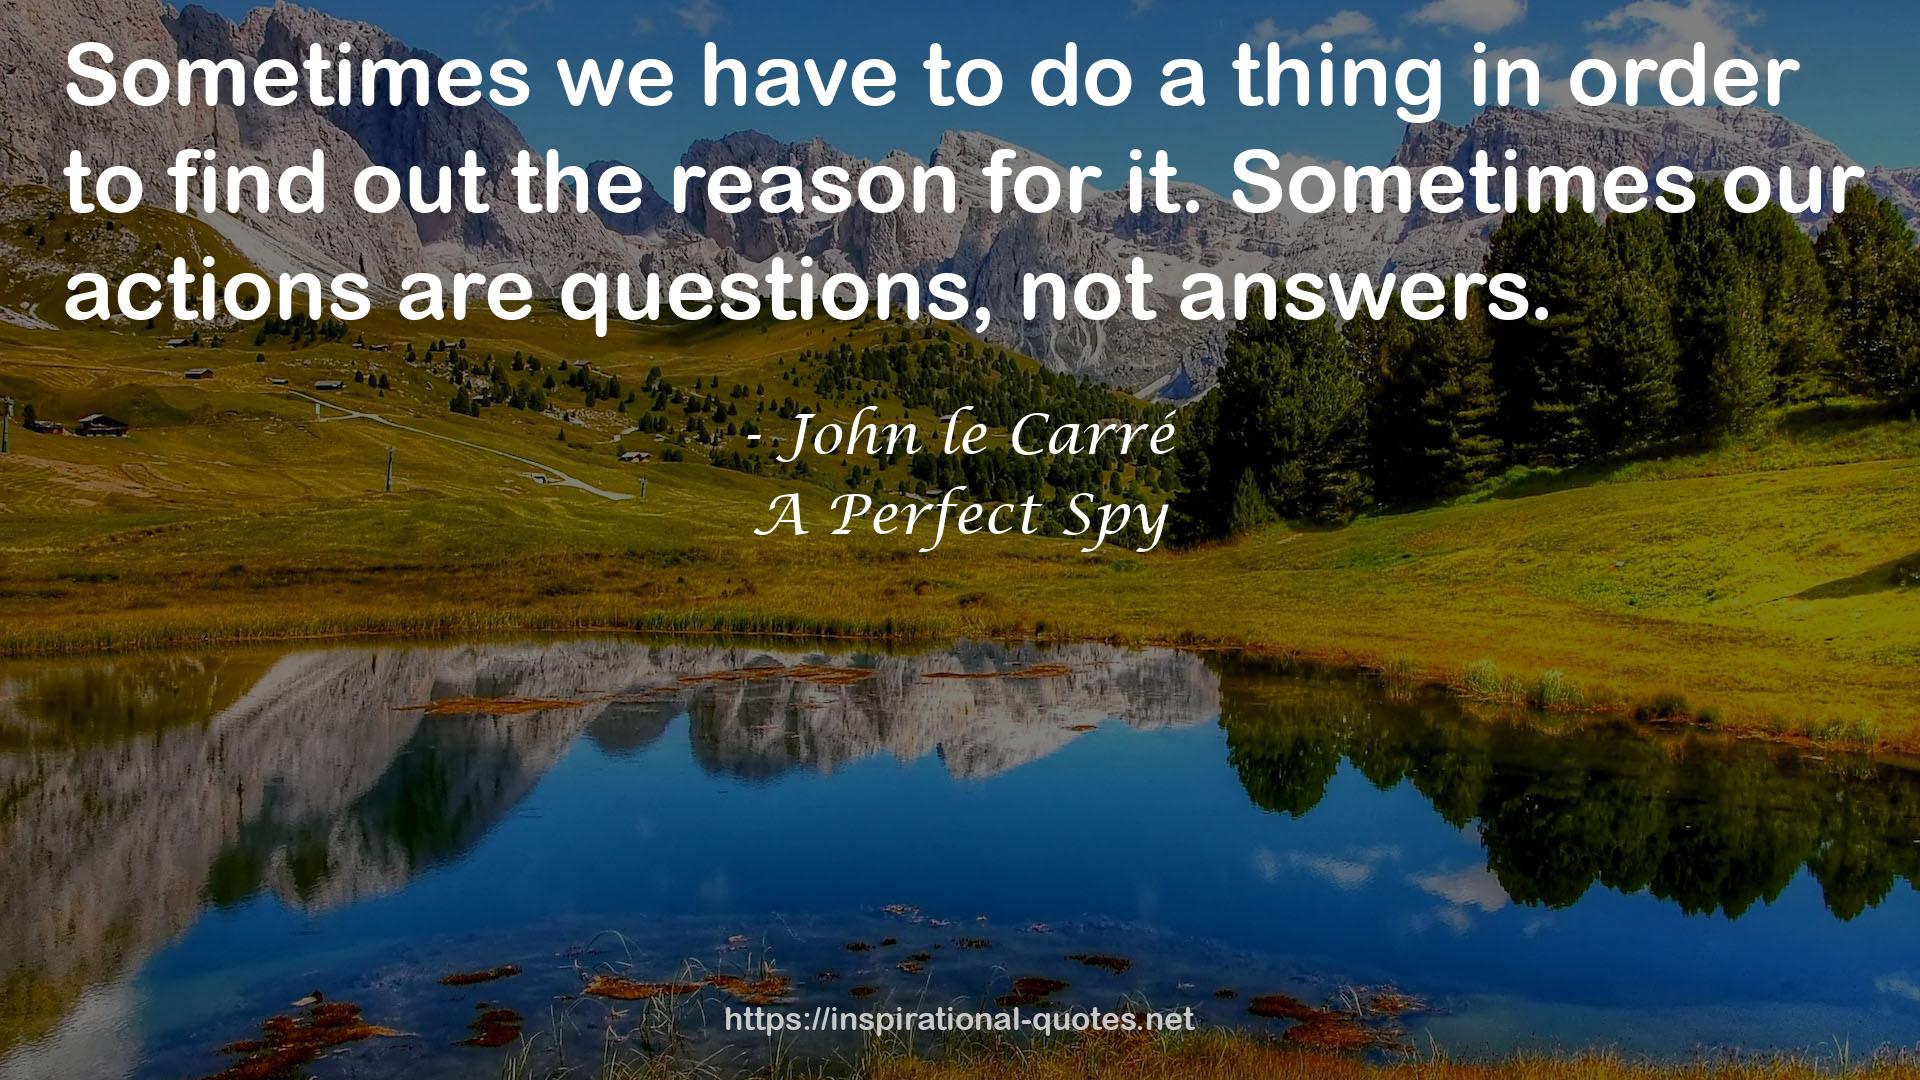 A Perfect Spy QUOTES